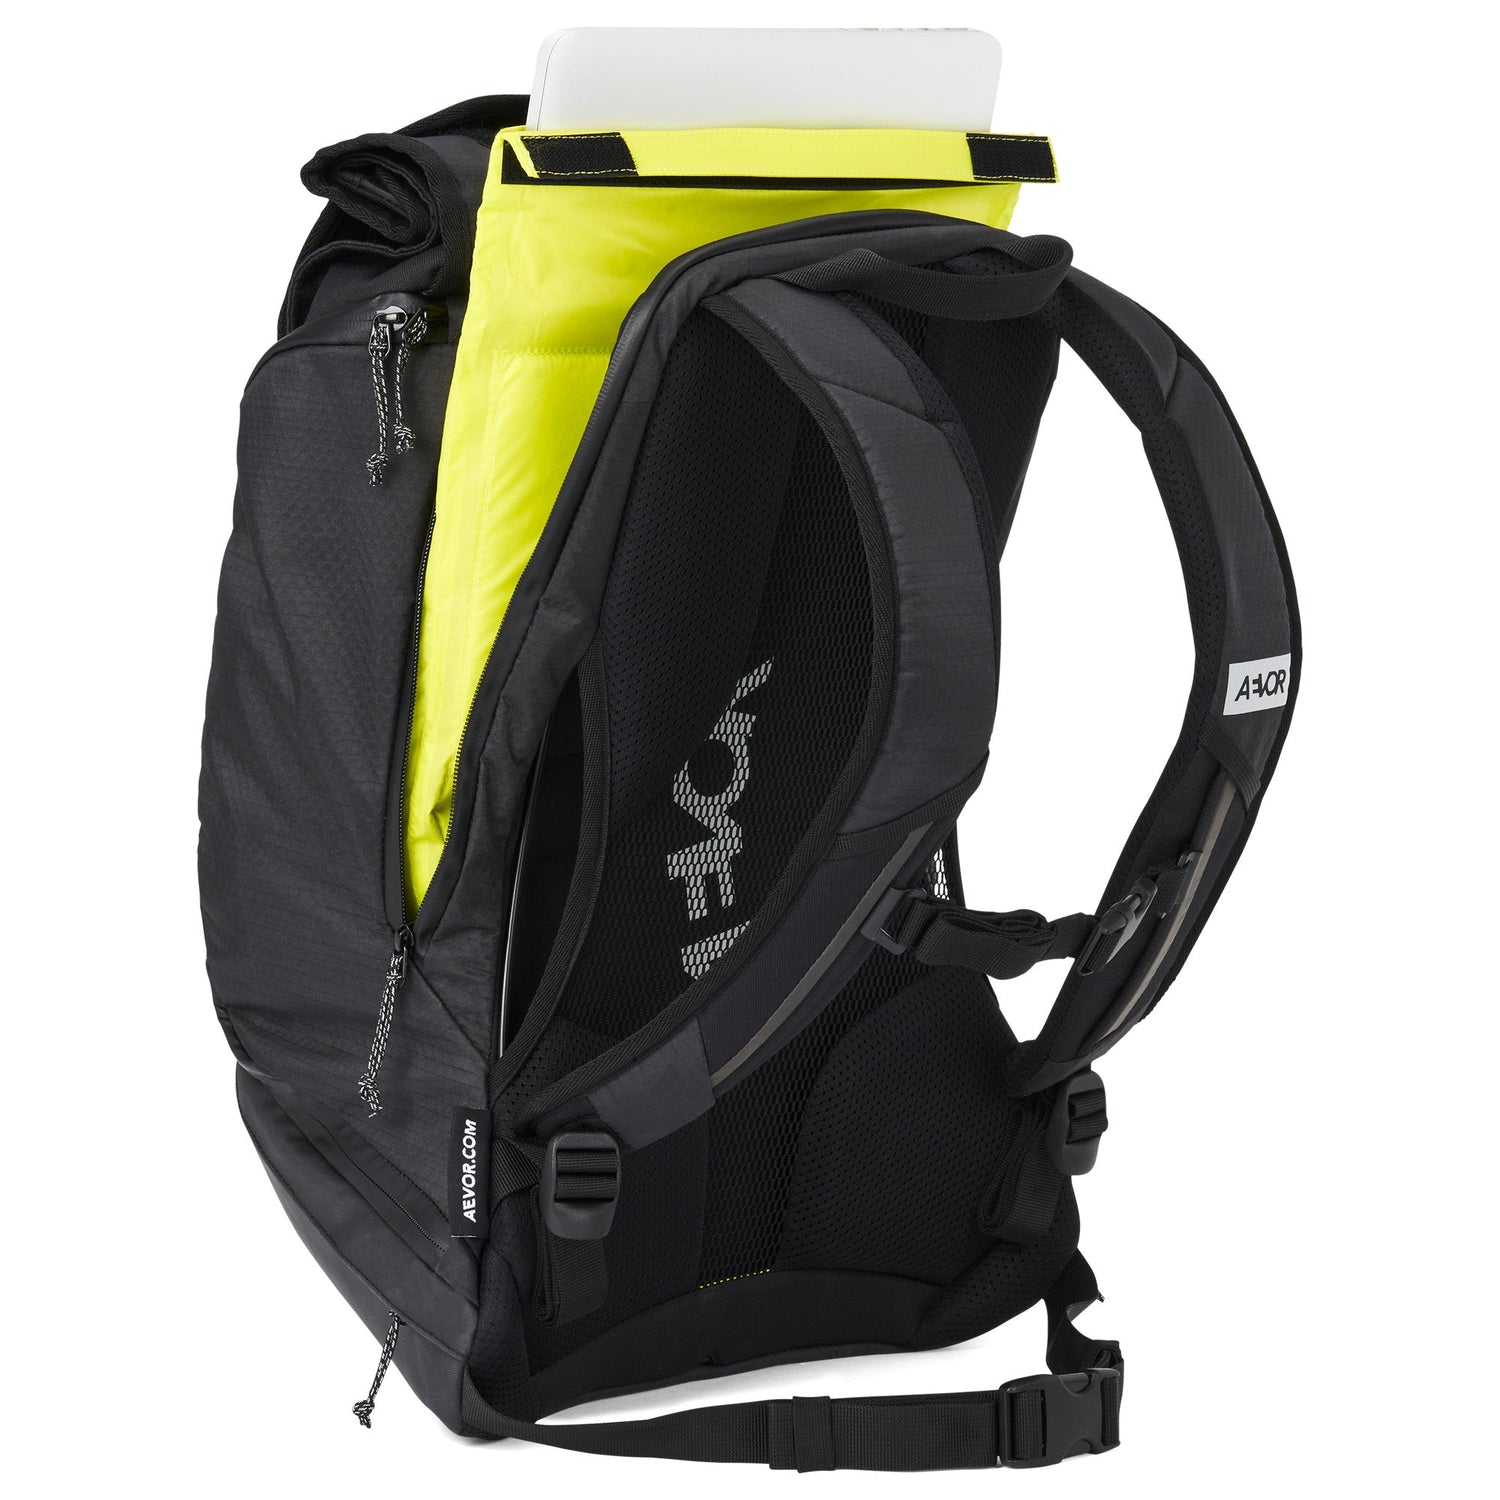 Aevor Bike Pack Proof - Made from Recycled PET-bottles Black w Reflective Bags